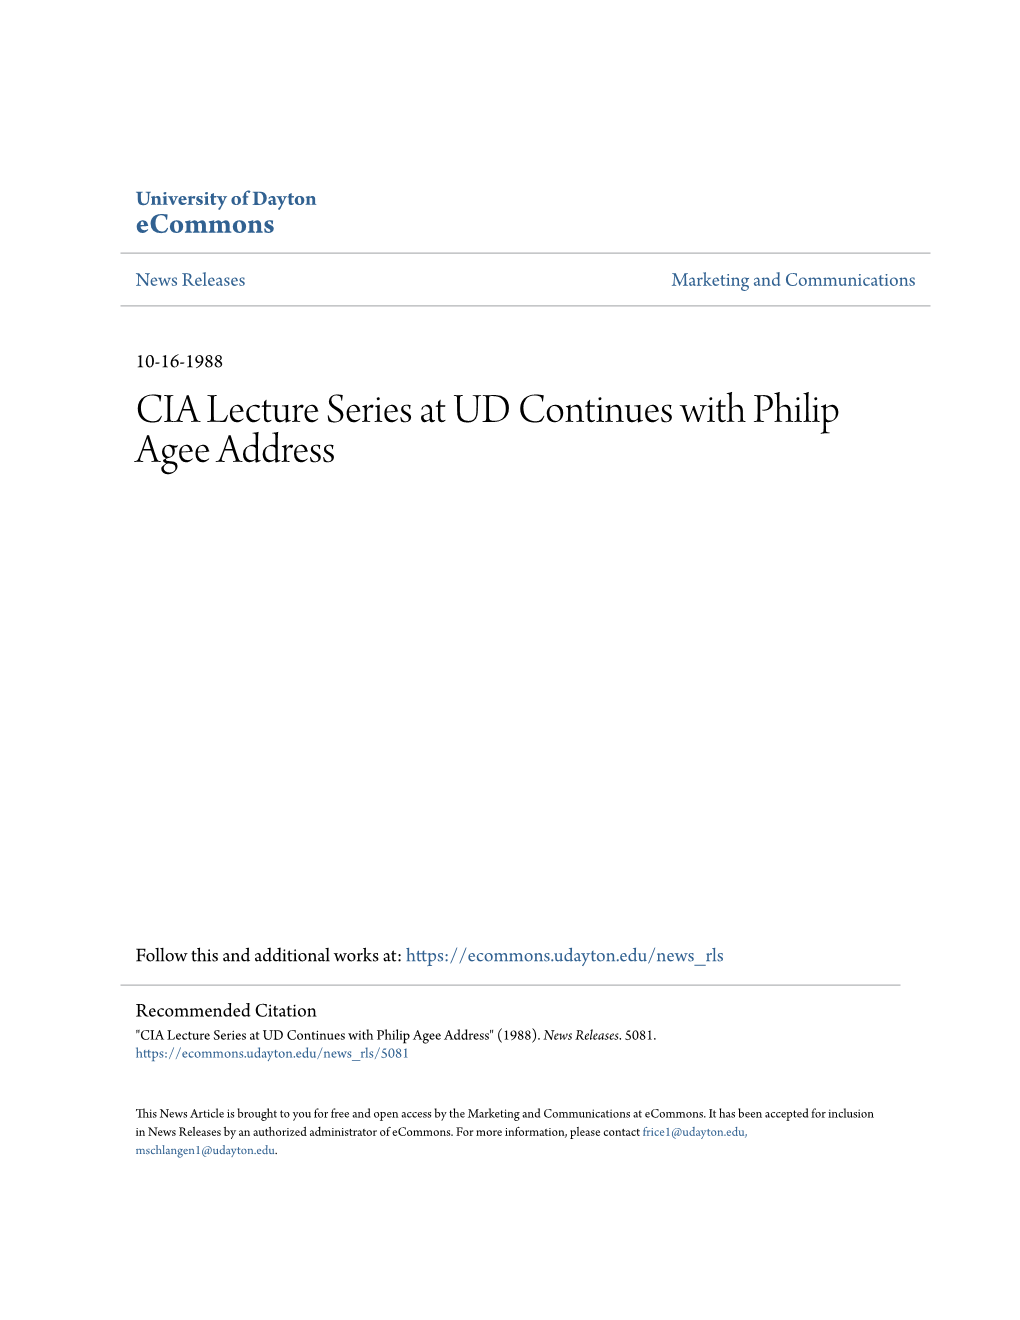 CIA Lecture Series at UD Continues with Philip Agee Address